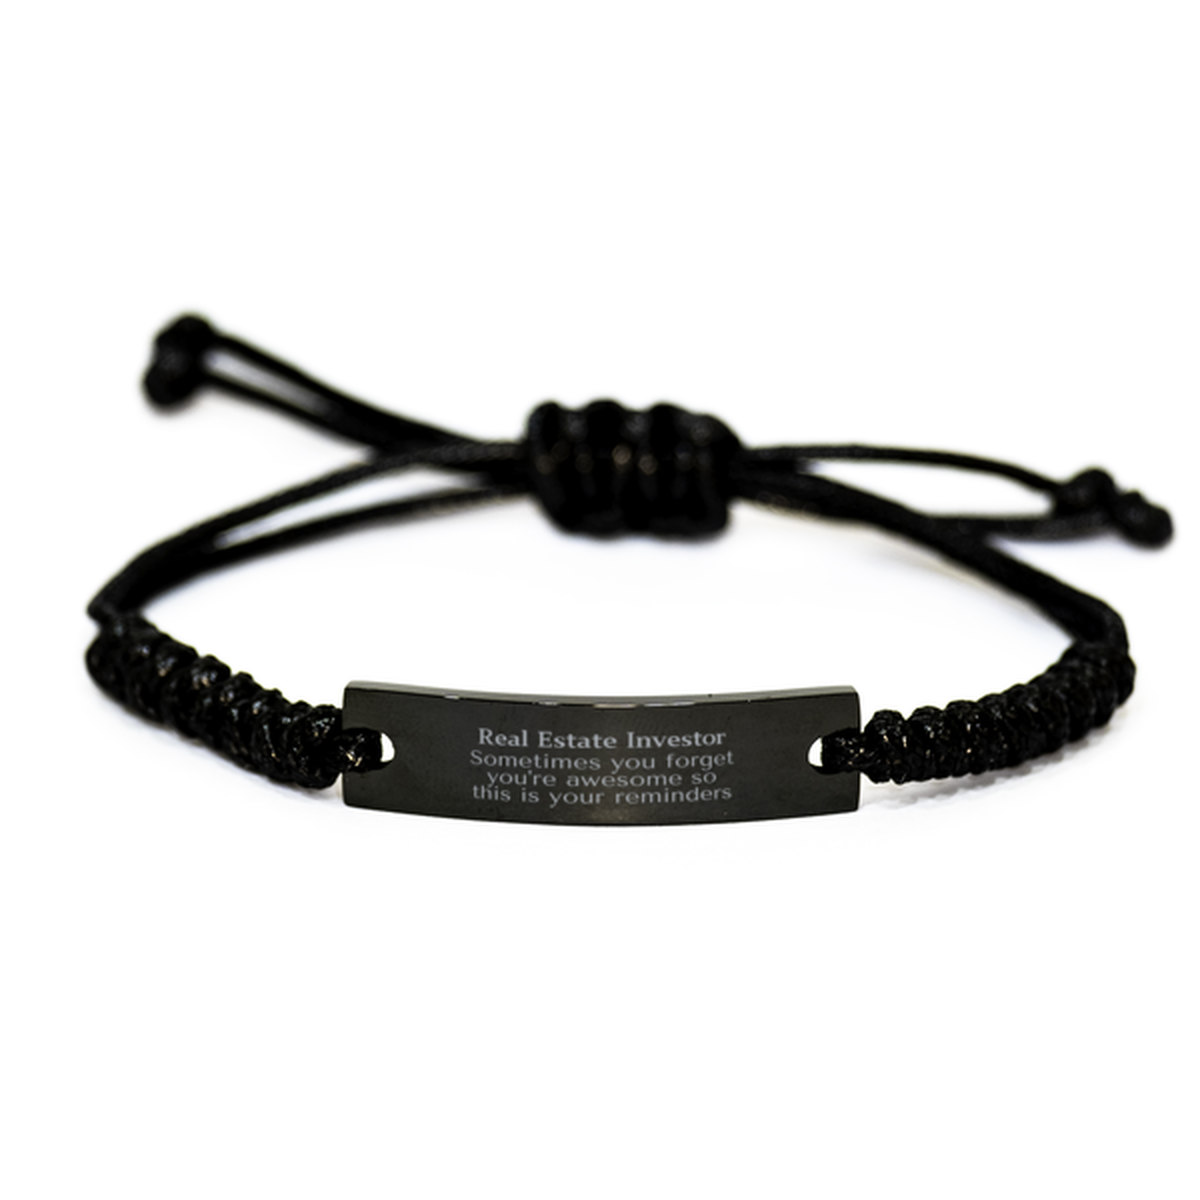 Sentimental Real Estate Investor Black Rope Bracelet, Real Estate Investor Sometimes you forget you're awesome so this is your reminders, Graduation Christmas Birthday Gifts for Real Estate Investor, Men, Women, Coworkers